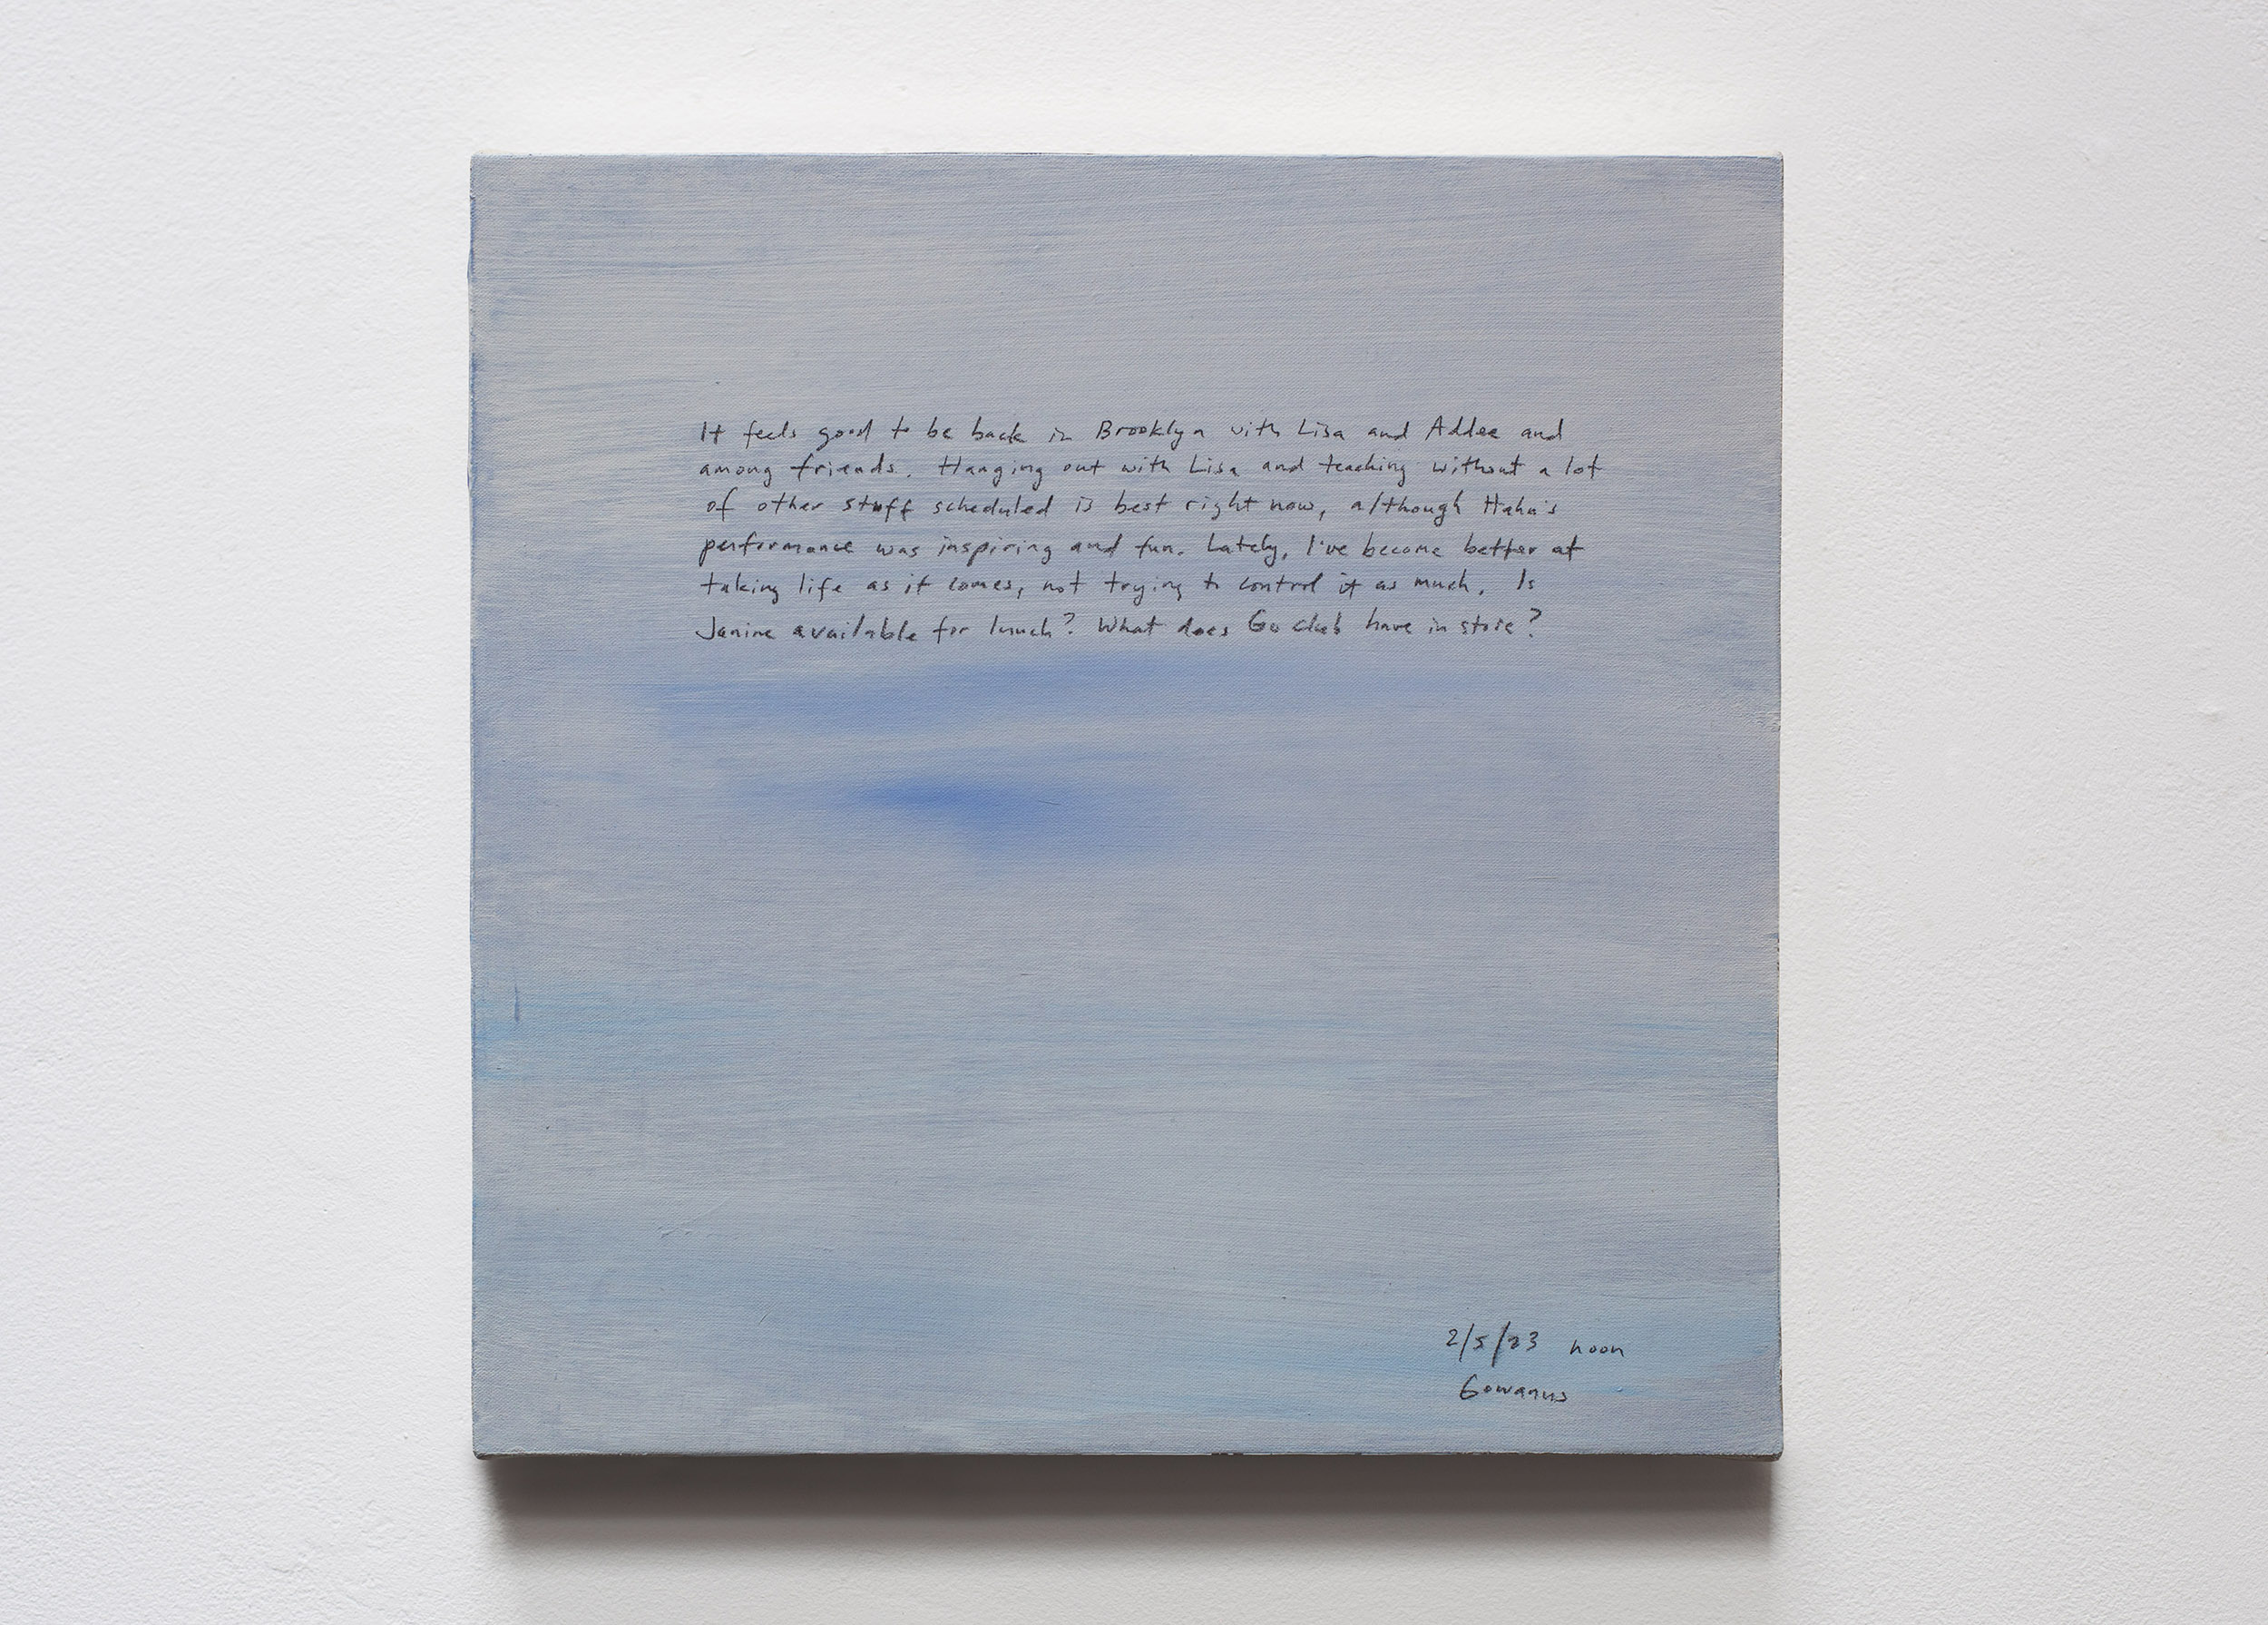 A 14 × 14 inch, acrylic painting of the sky. A journal entry is handwritten on the painting:

“It feels good to be back in Brooklyn with Lisa and Addee and among friends. Hanging out with Lisa and teaching without a lot of other stuff scheduled is best right now, although Hahn’s performance was inspiring and fun. Lately, I’ve become better at taking life as it comes, not trying to control it as much. Is Janine available for lunch? What does Go club have in store?

2/5/23 noon
Gowanus